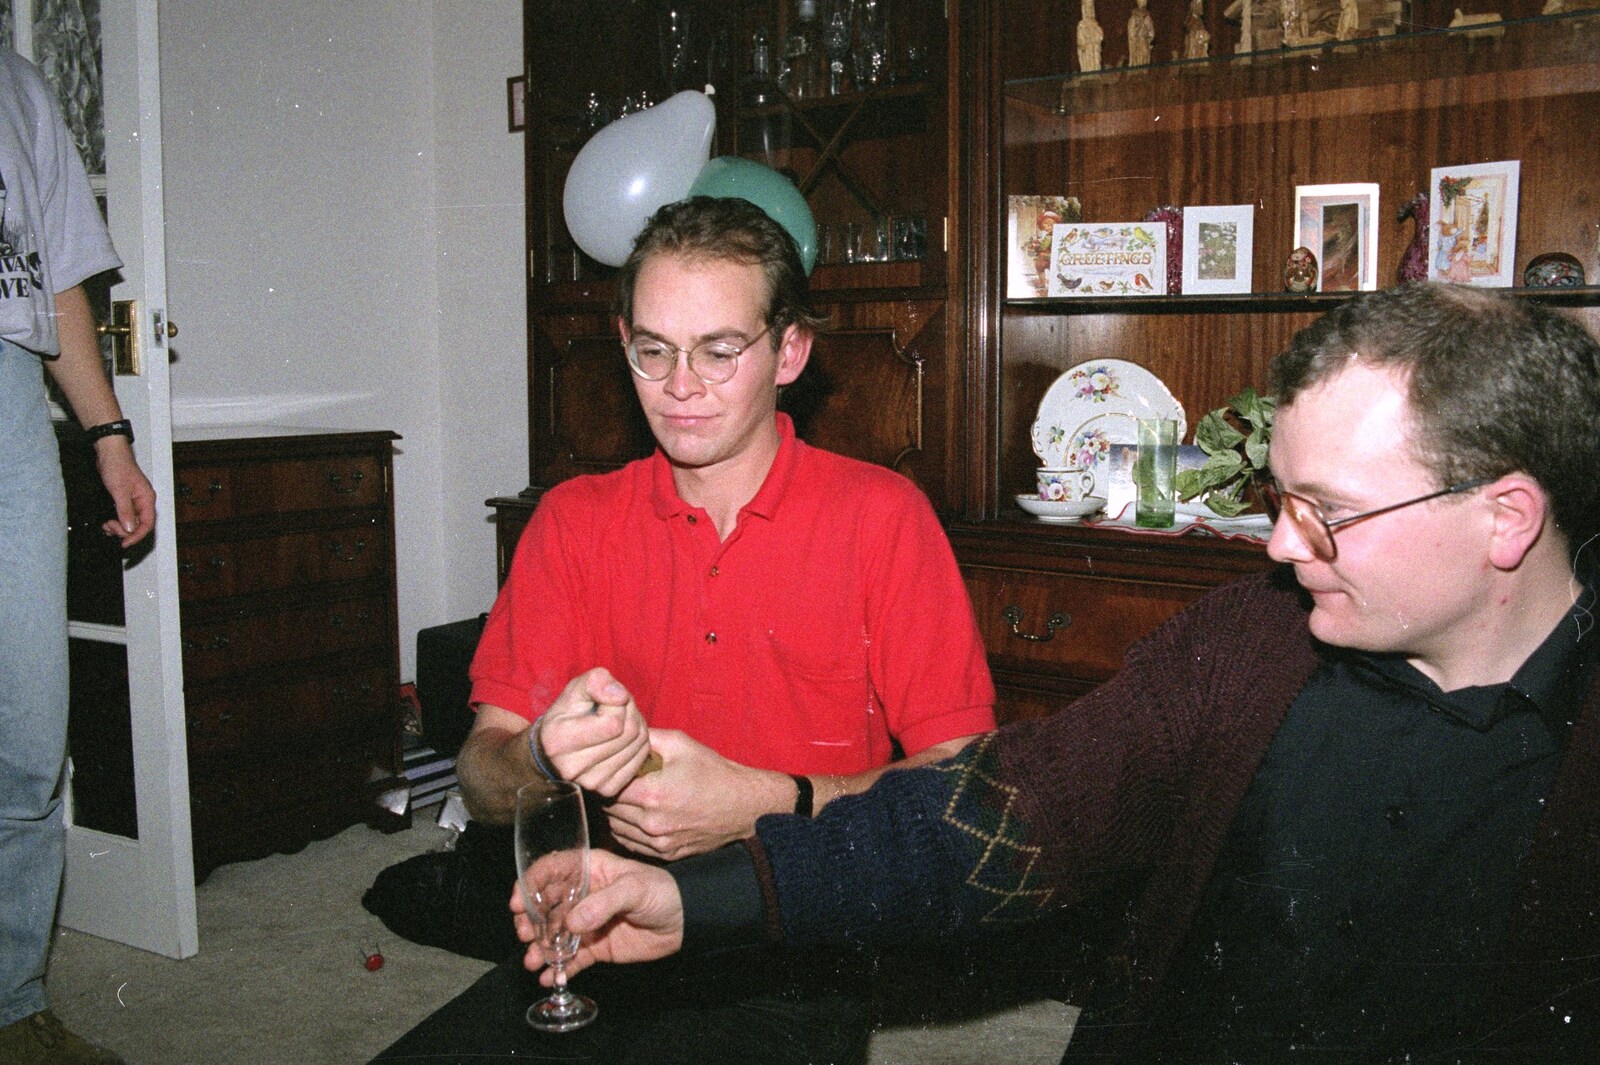 Phil opens a bottle of fizz from New Year's Eve at Phil's, Hordle, Hampshire - 31st December 1990